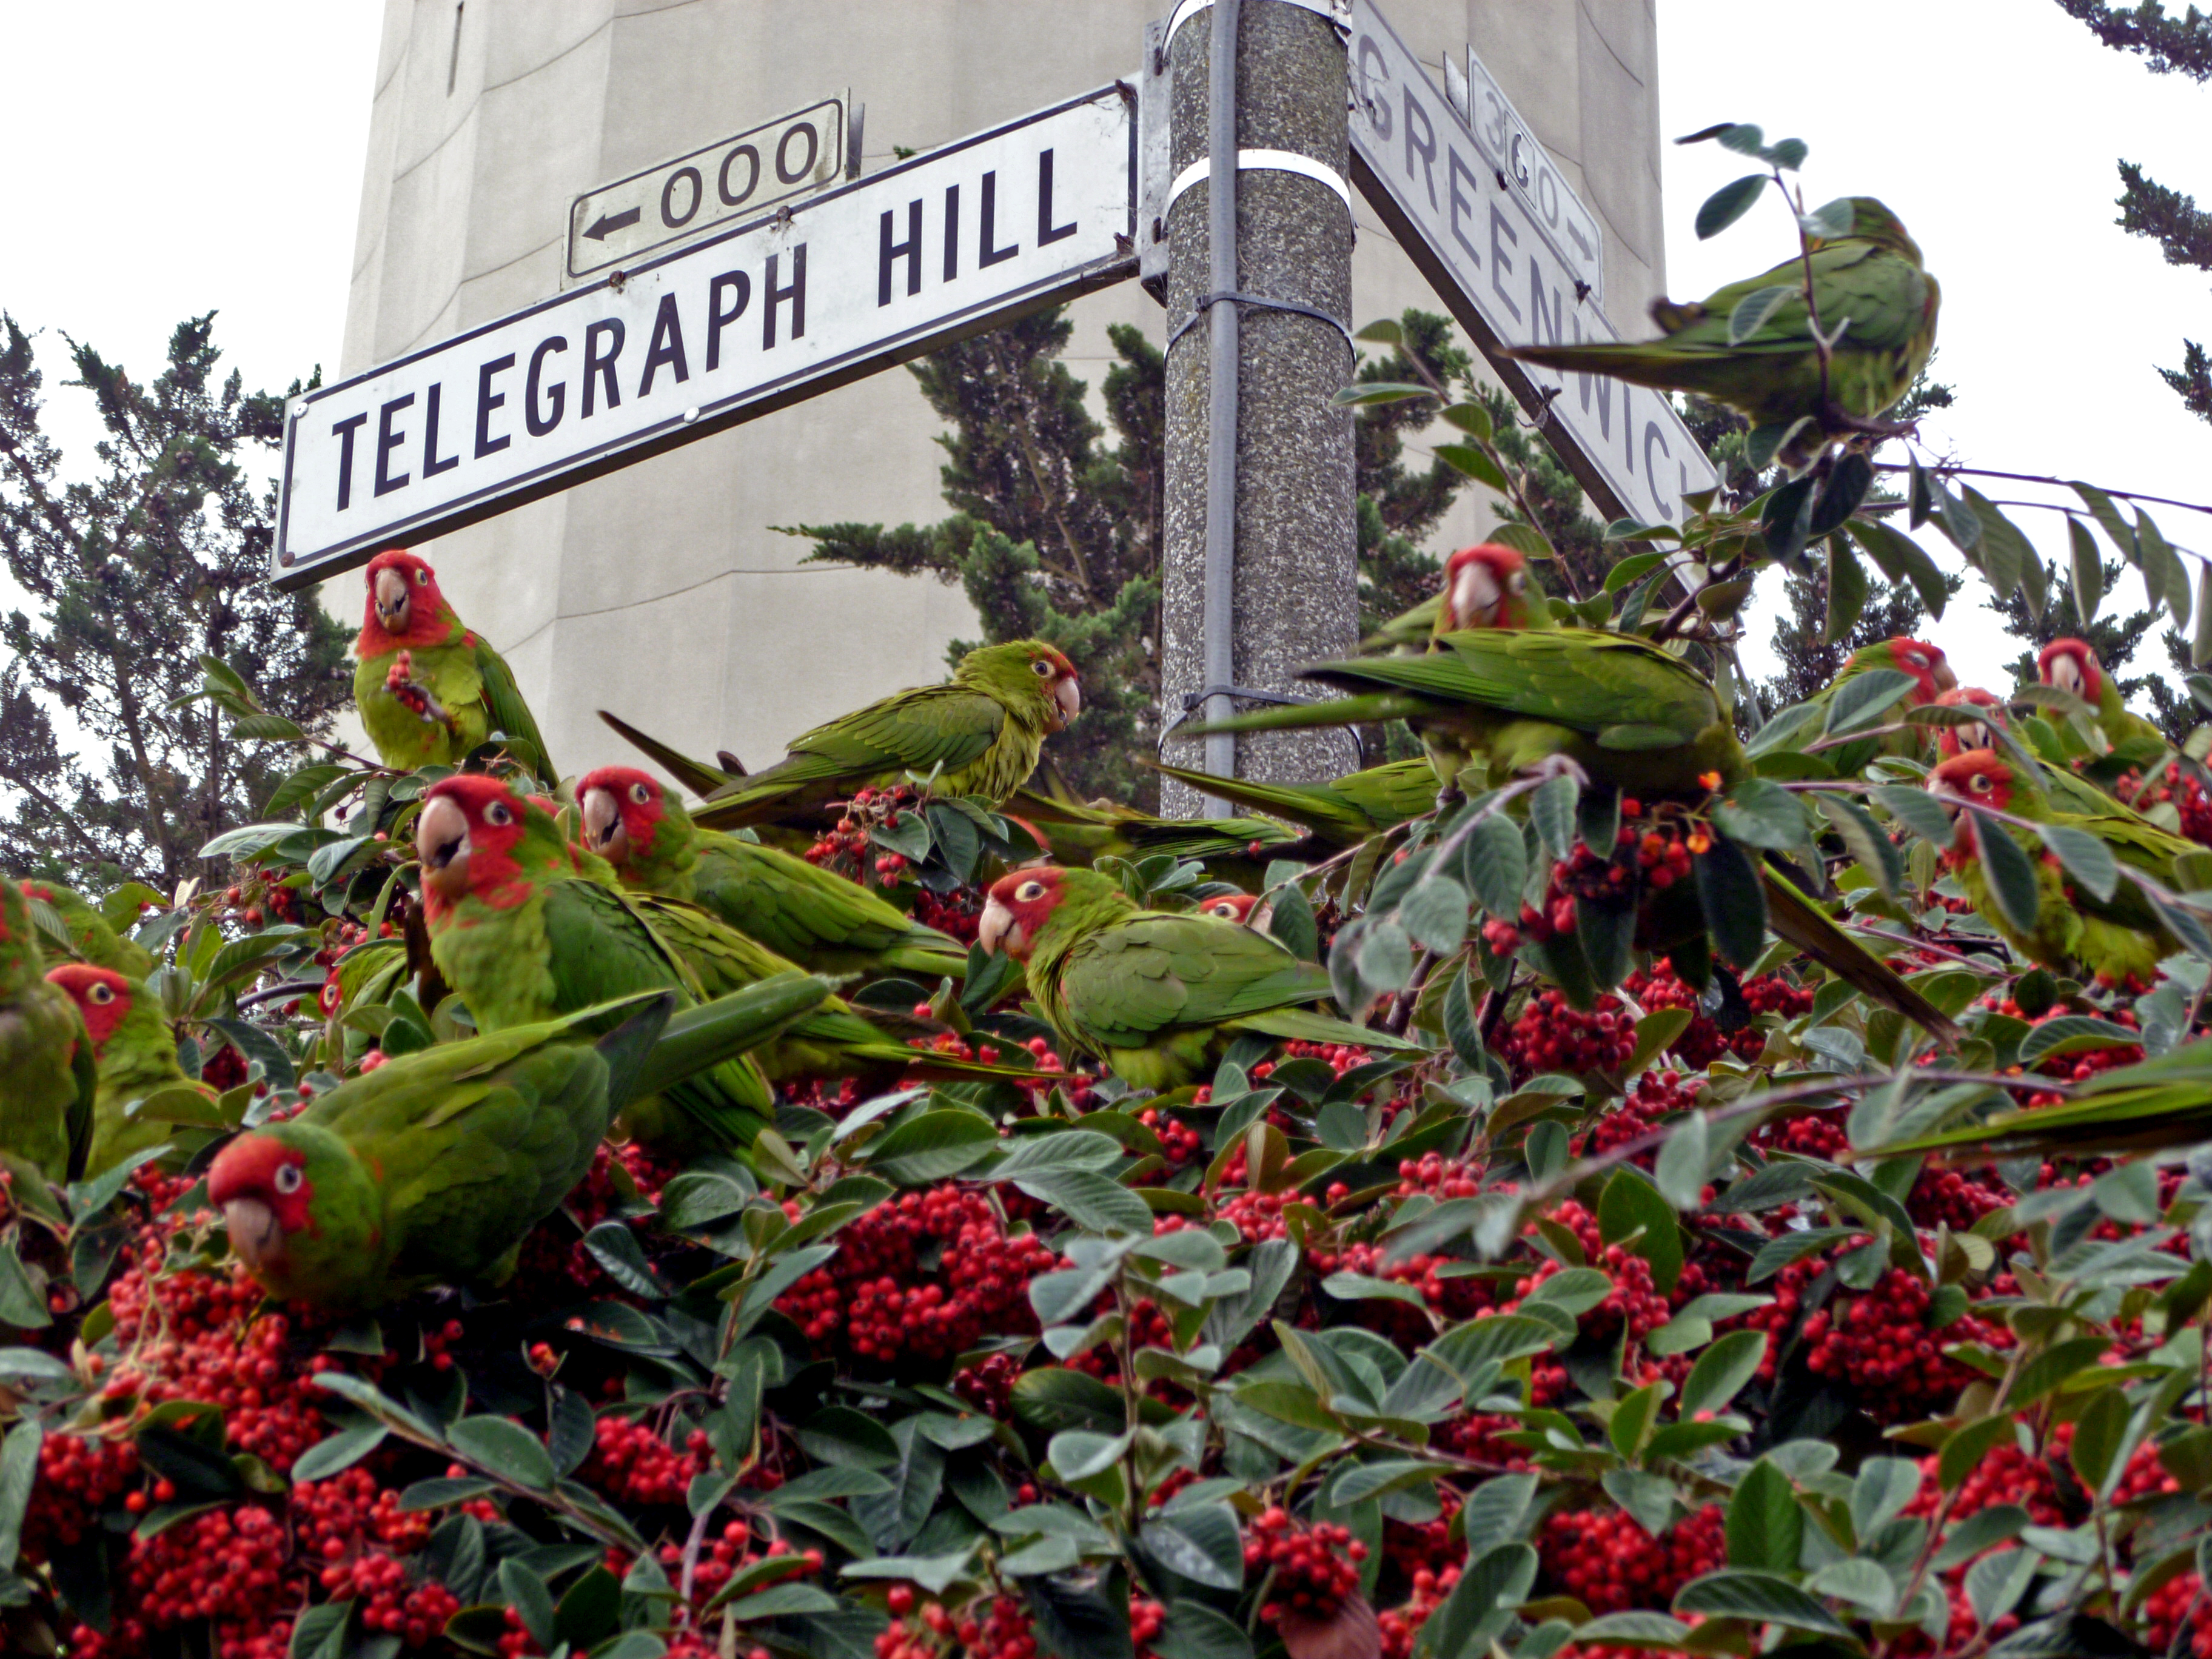 A group of parrots perches in a bush with the street signs labeled "Telegraph Hill" and "Greenwich" behind them.